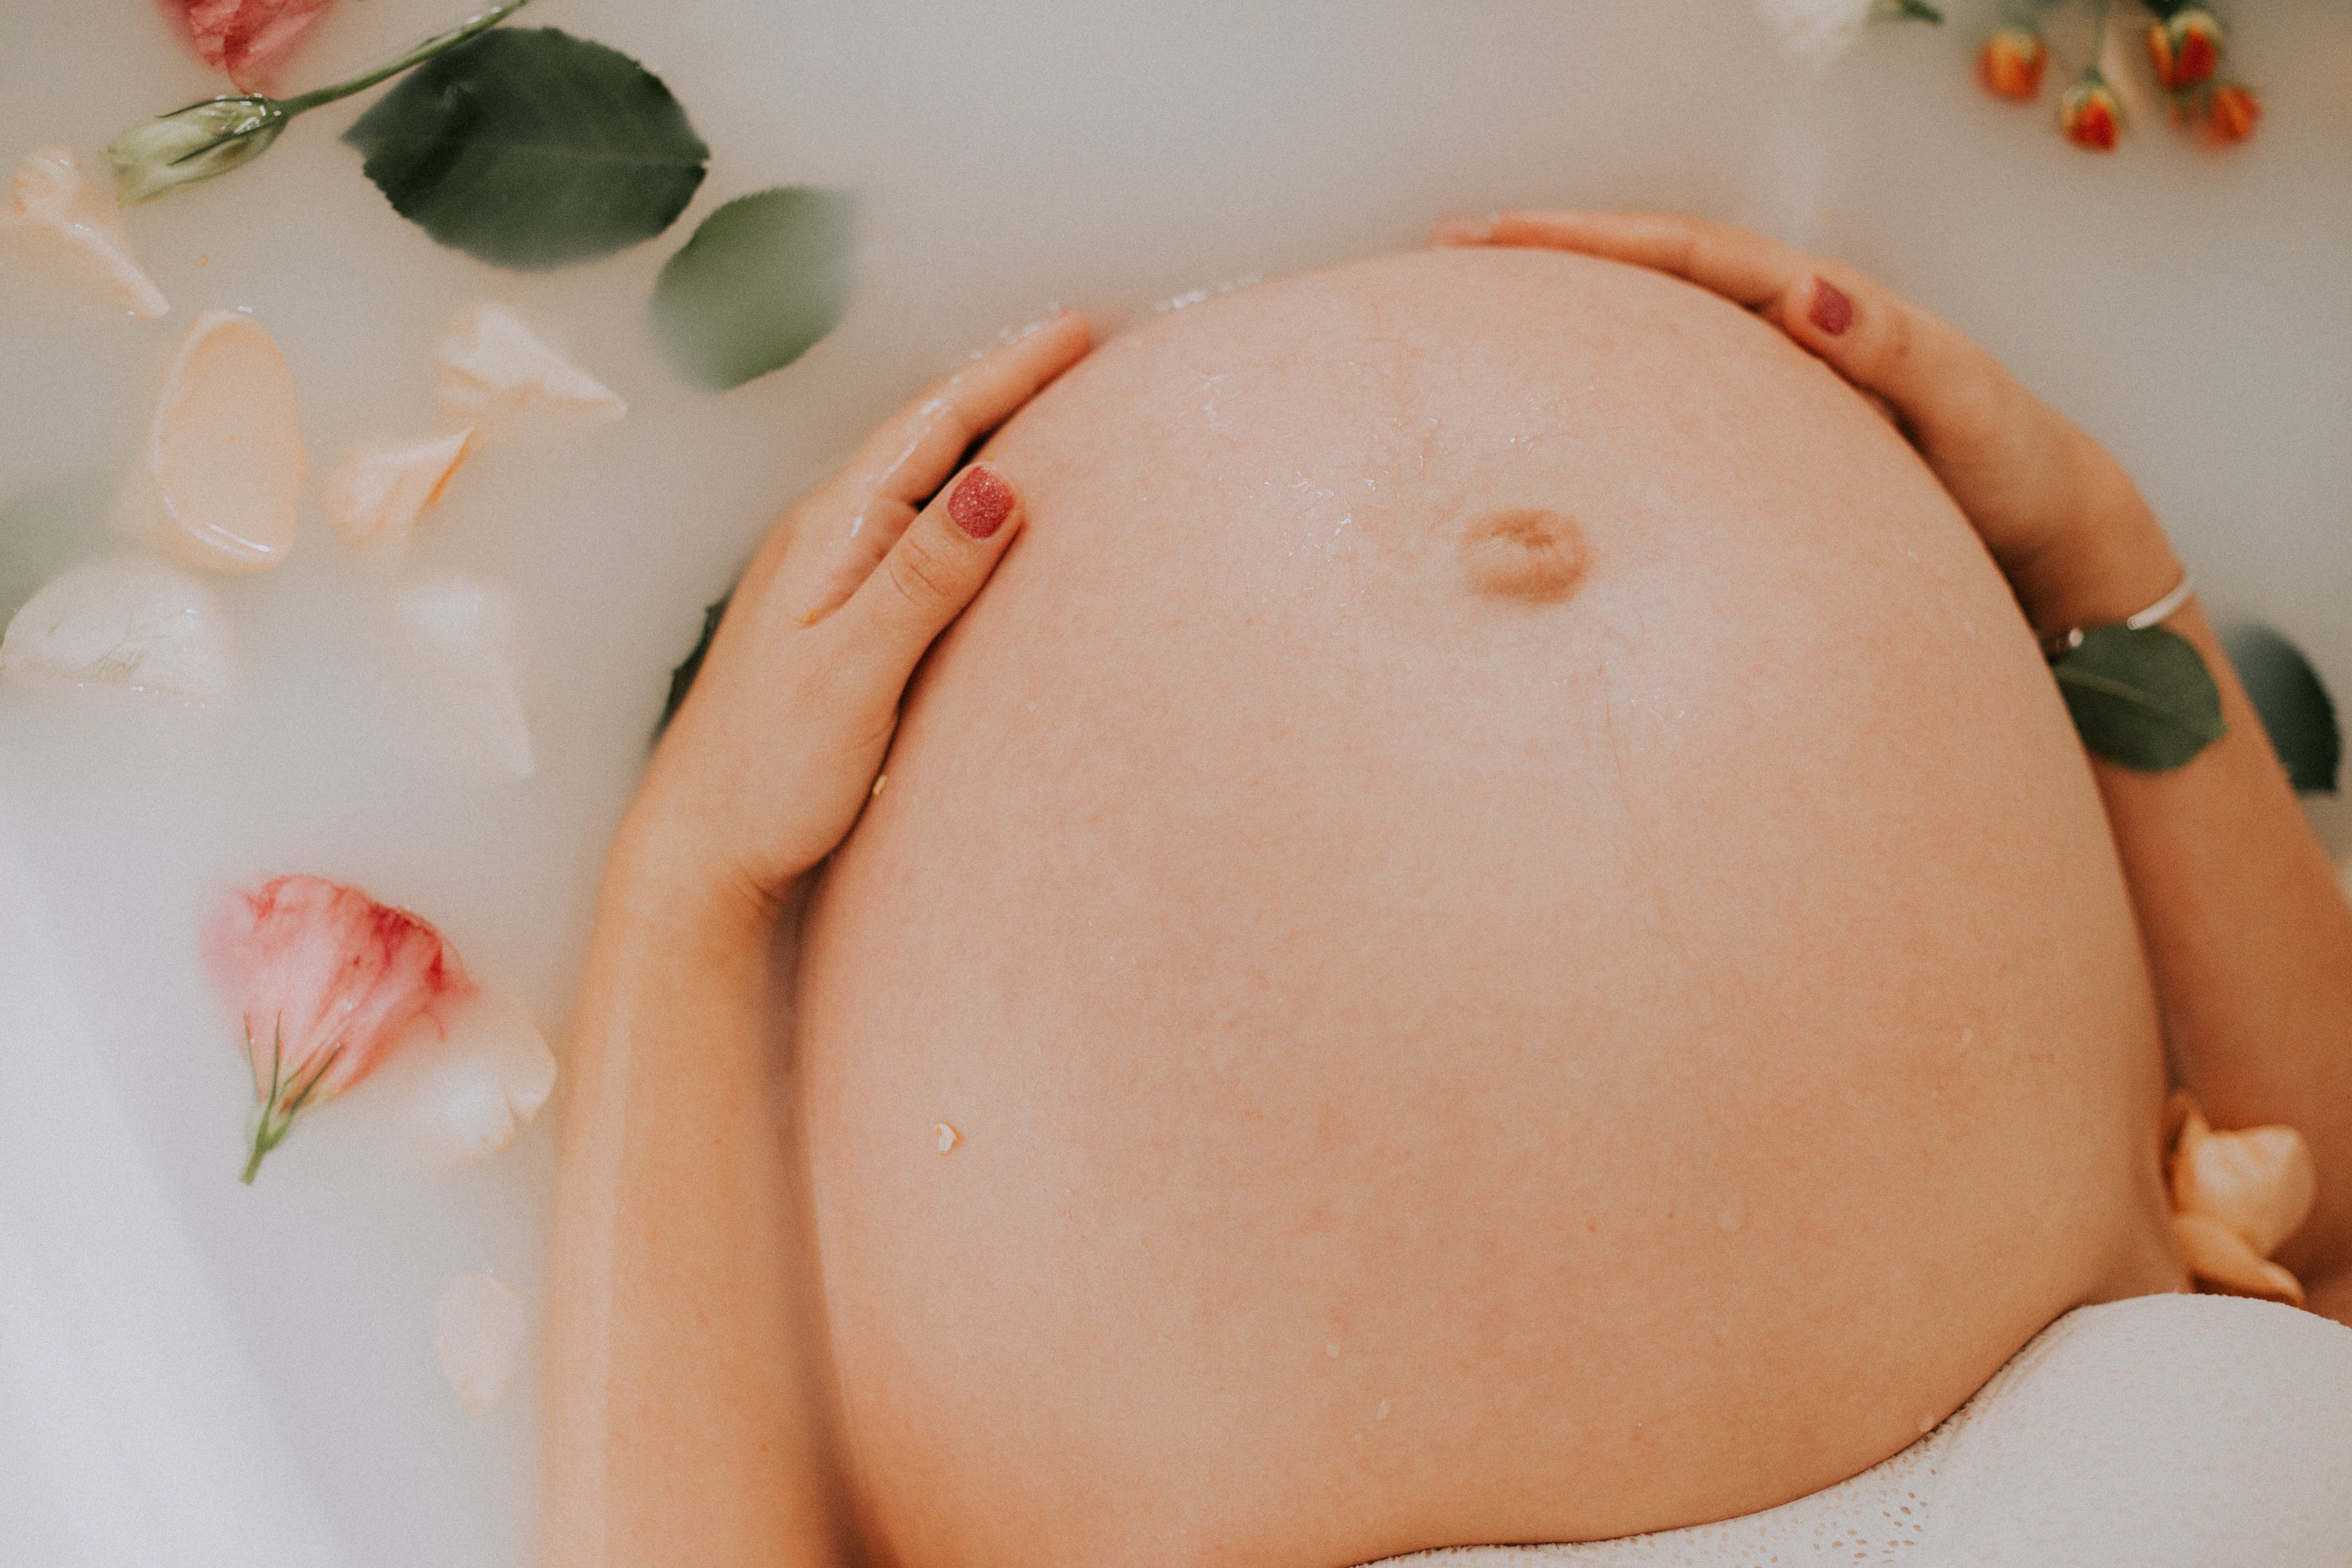 A round pregnant belly | Source: Pexels